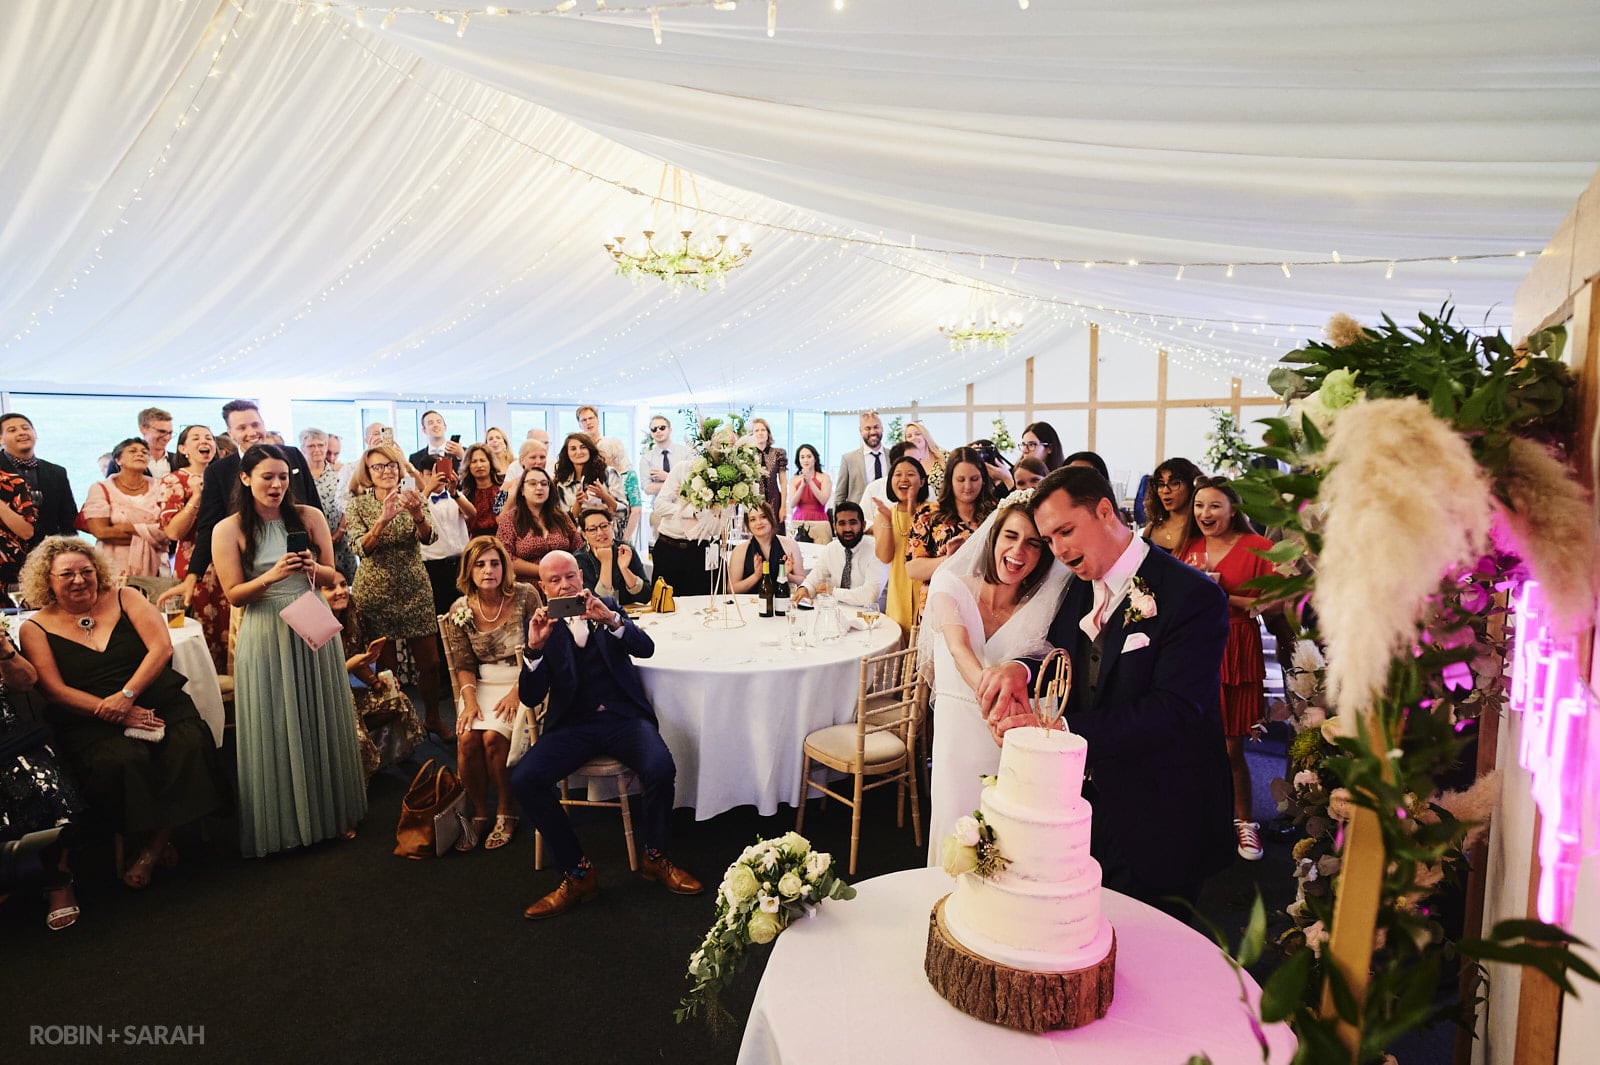 Bride and groom cut wedding cake in marquee at Wethele Manor as guests watch and take photos